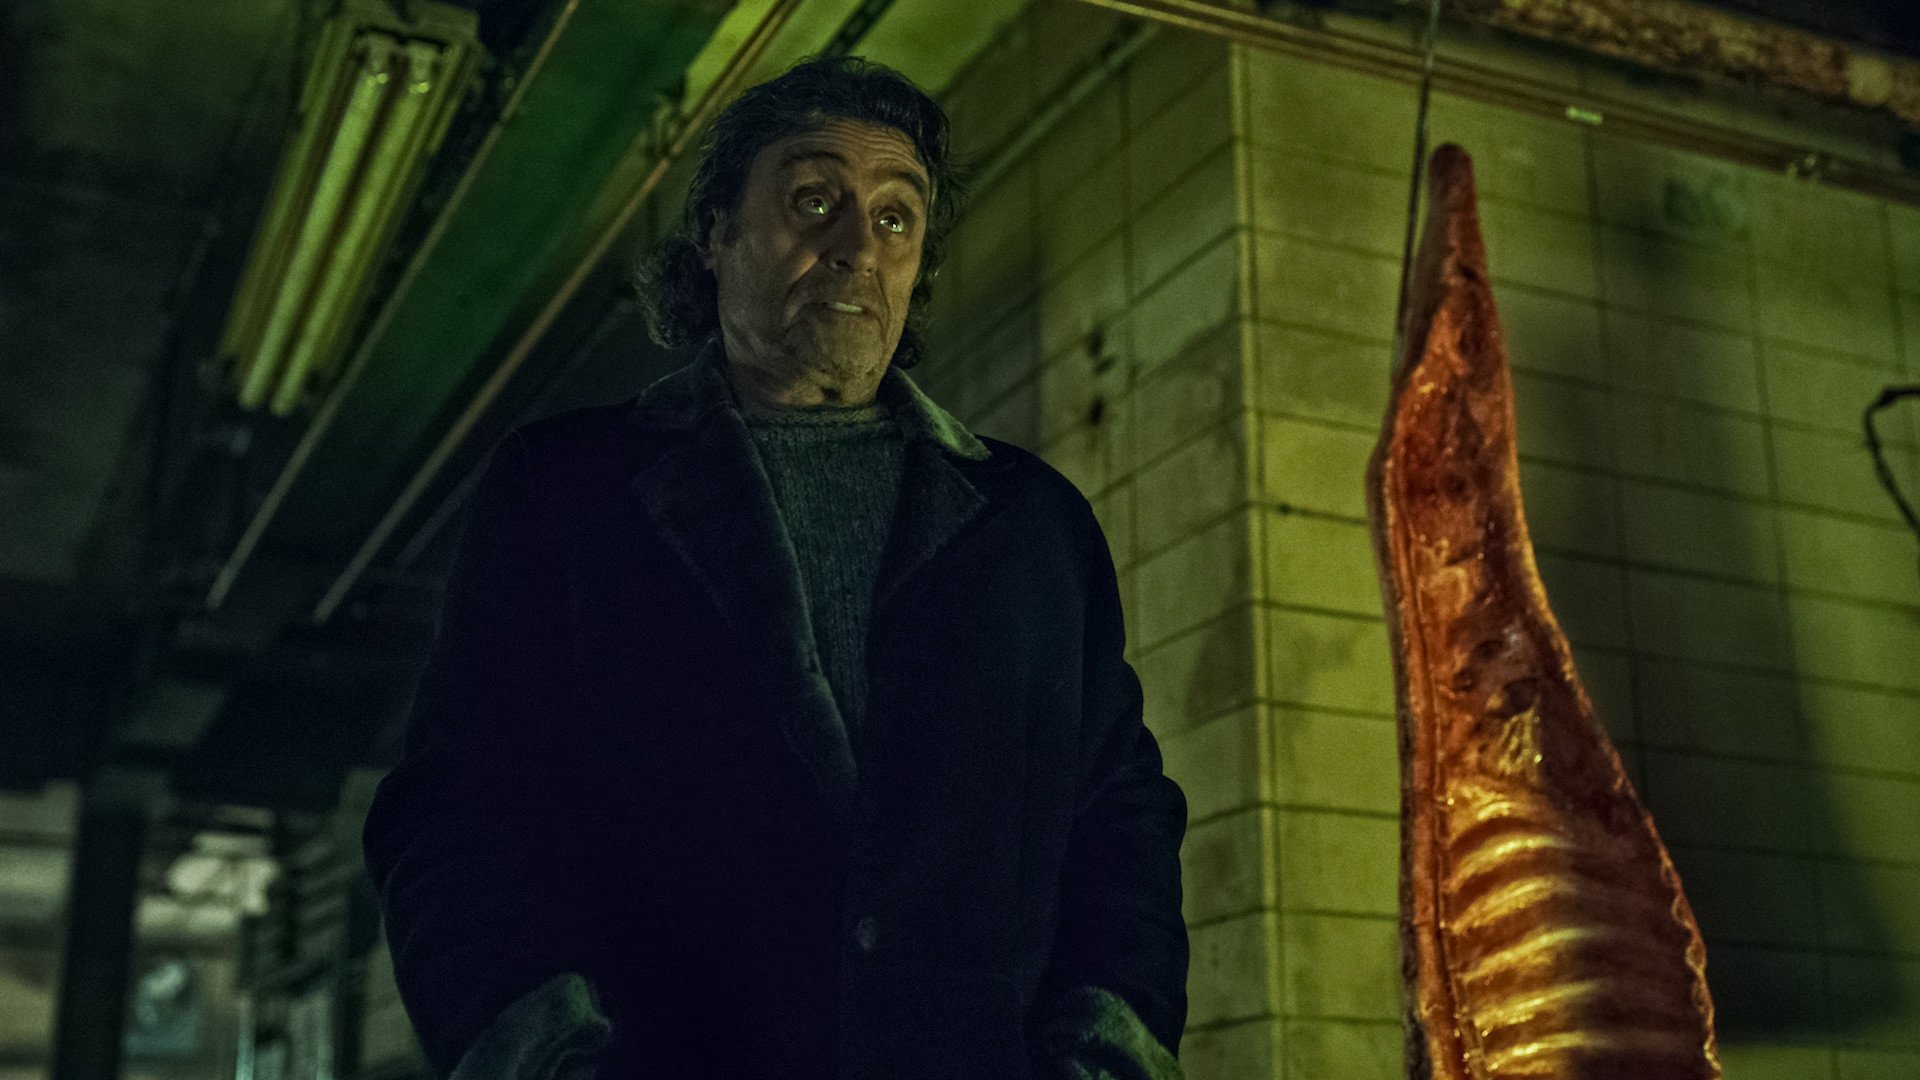 Ian McShane as Mr. Wednesday, wearing a dark coat, in 'American Gods', one of 2021's canceled TV shows.